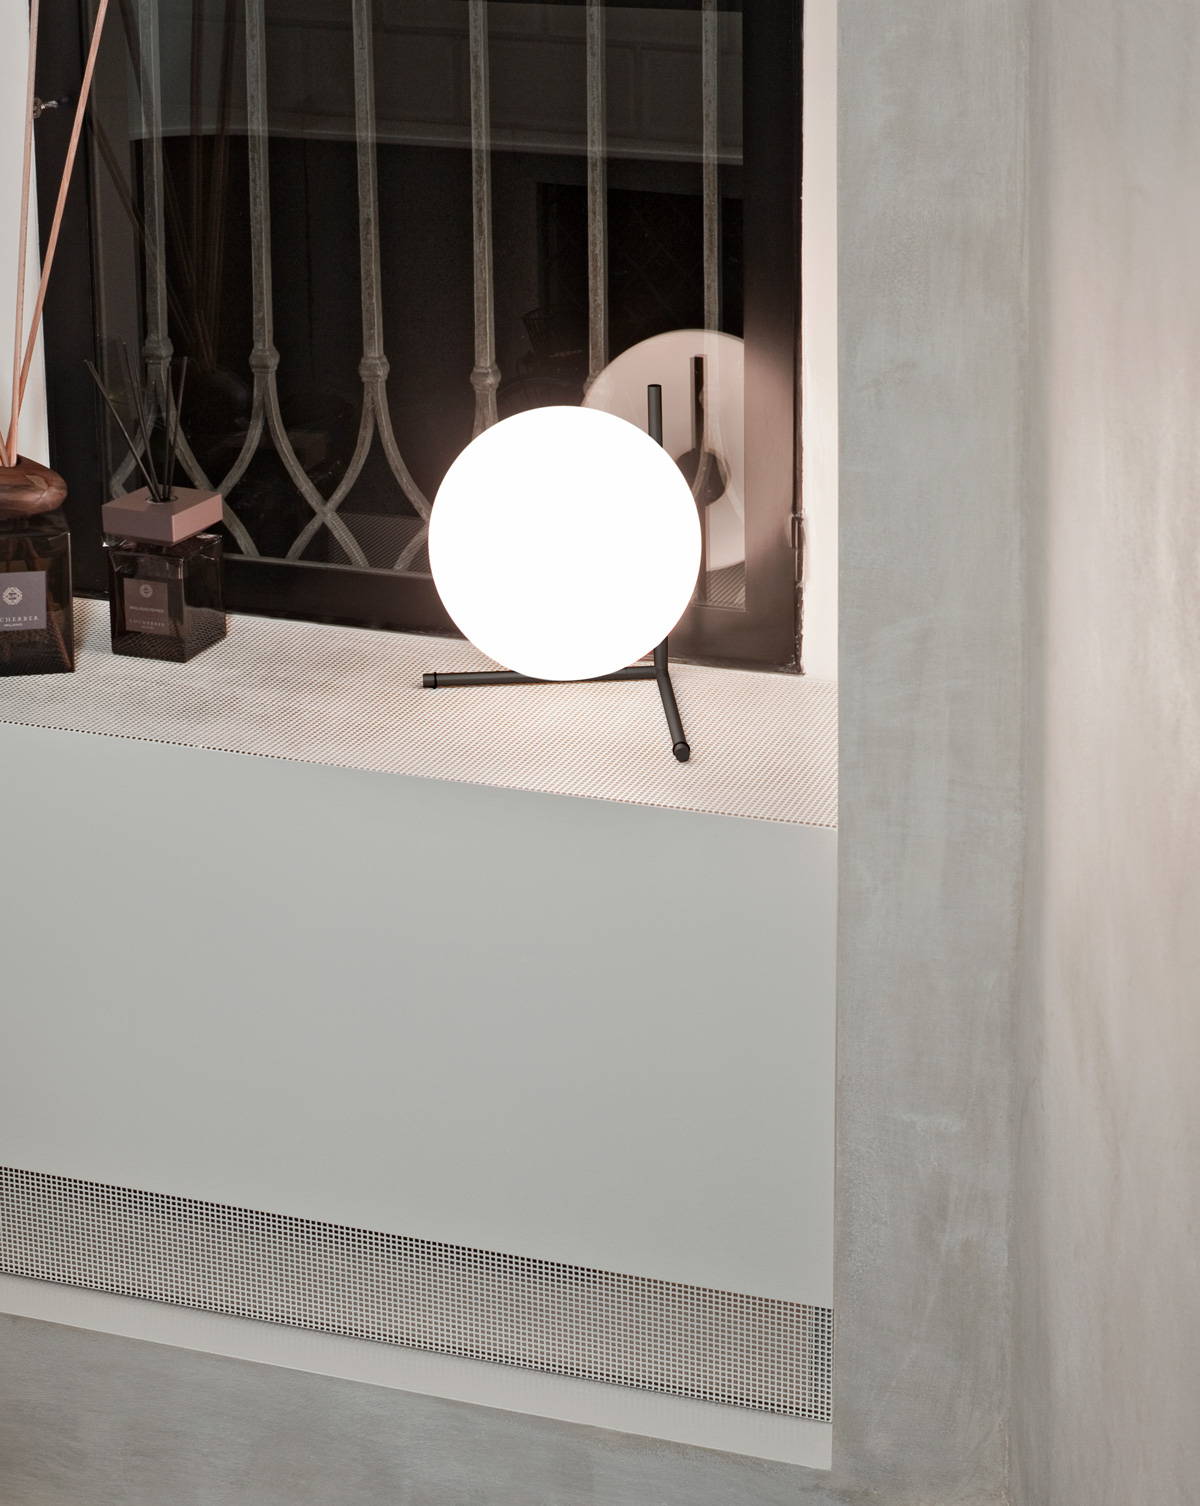 IC Lights Collection designed by Michael Anastassiades | FLOS USA